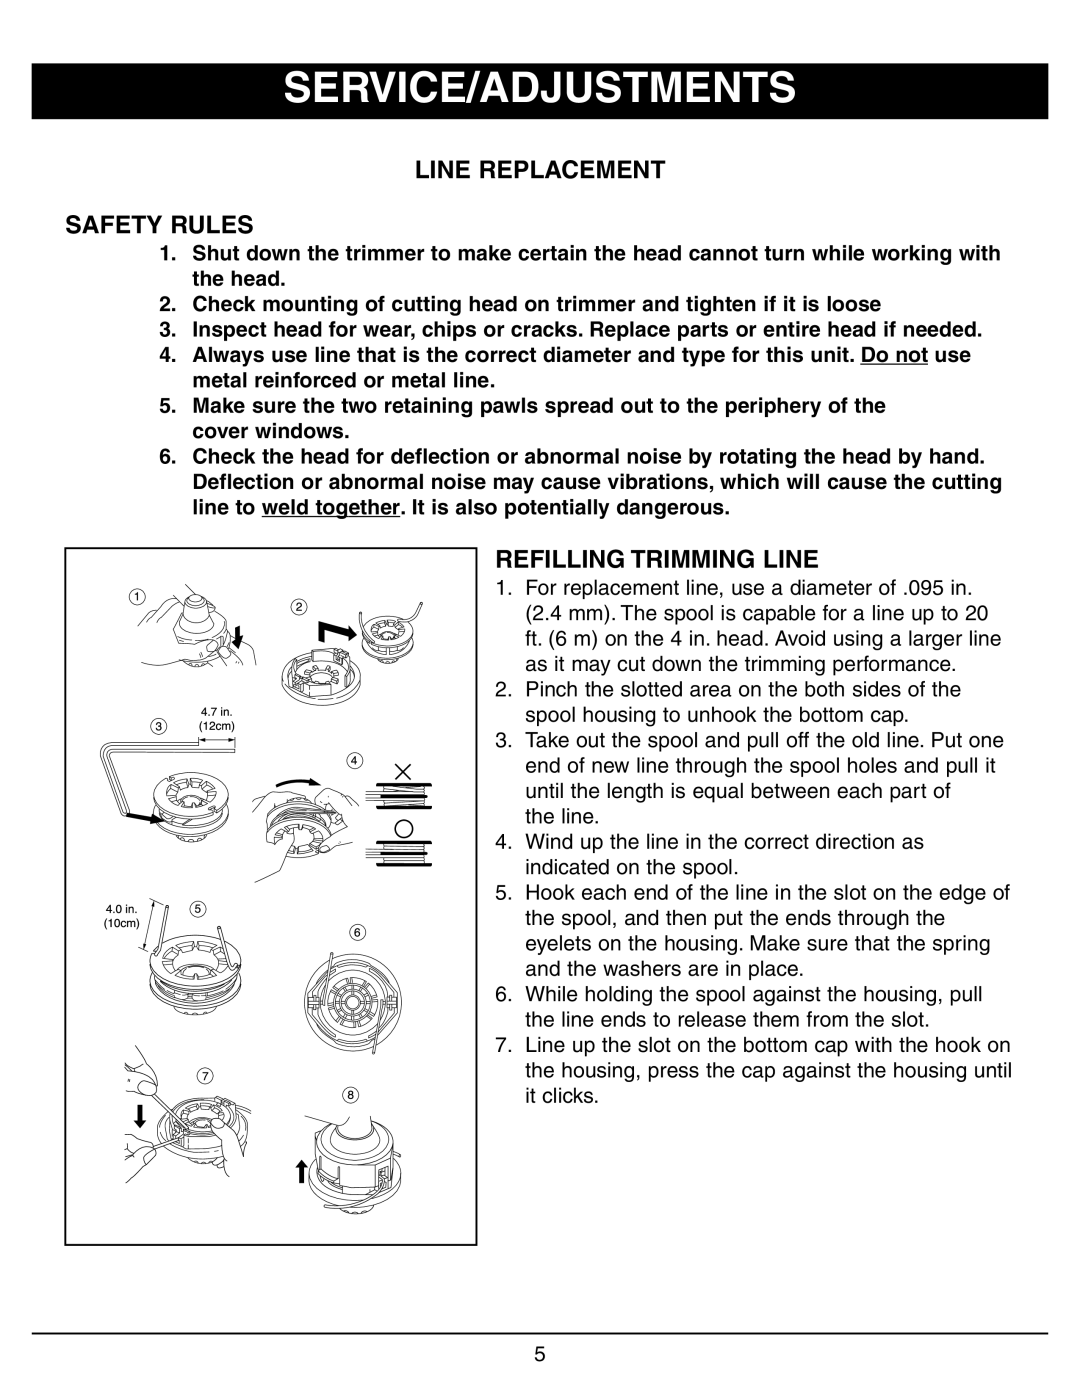 Sarlo CS-16 owner manual Service/Adjustments, Line Replacement Safety Rules, Refilling Trimming Line 